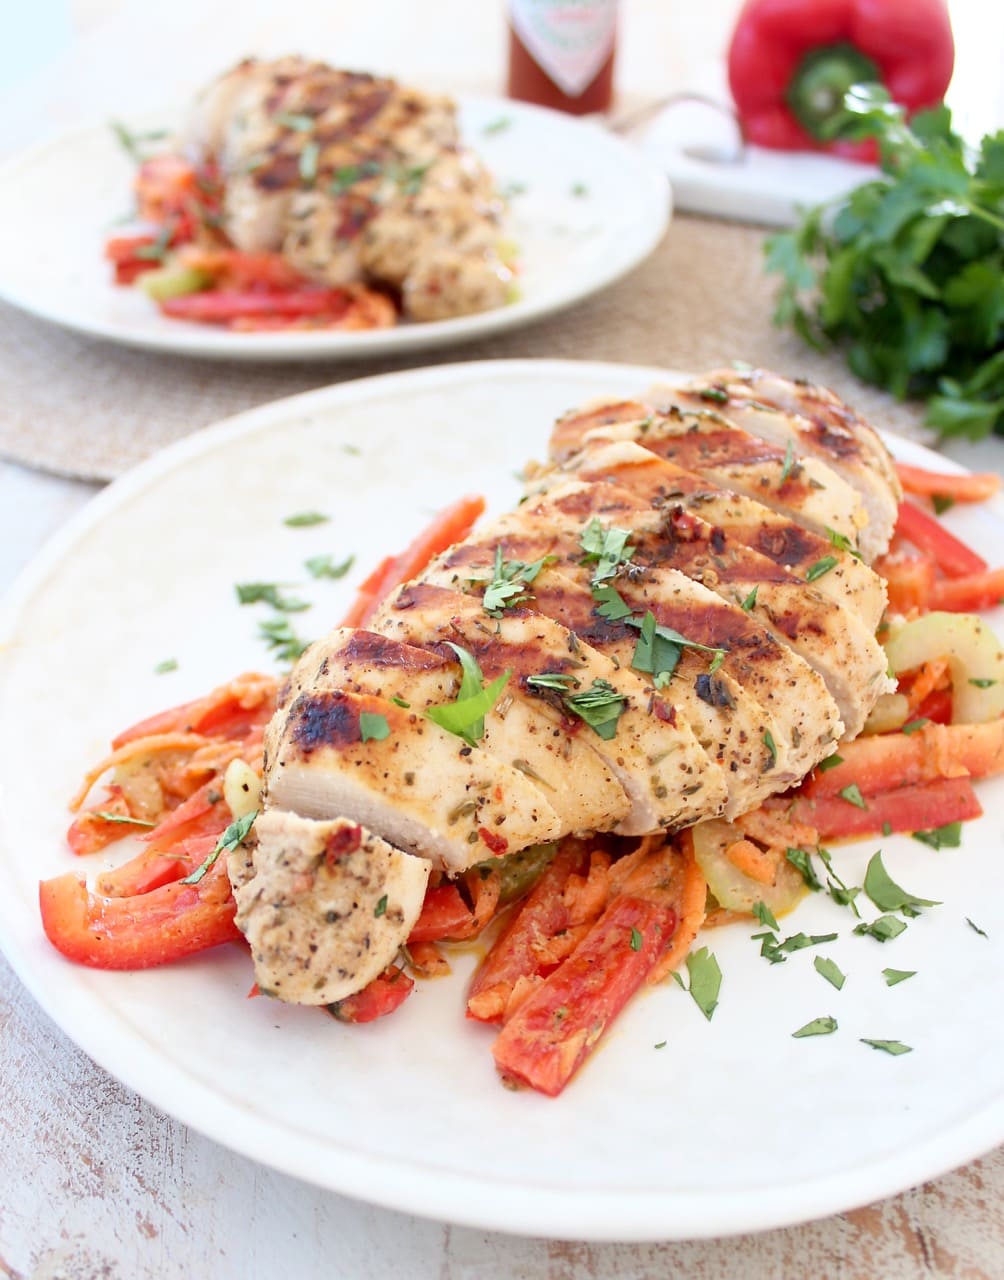 A white plate topped with sliced red bell peppers and a sliced chicken breast garnished with herbs.